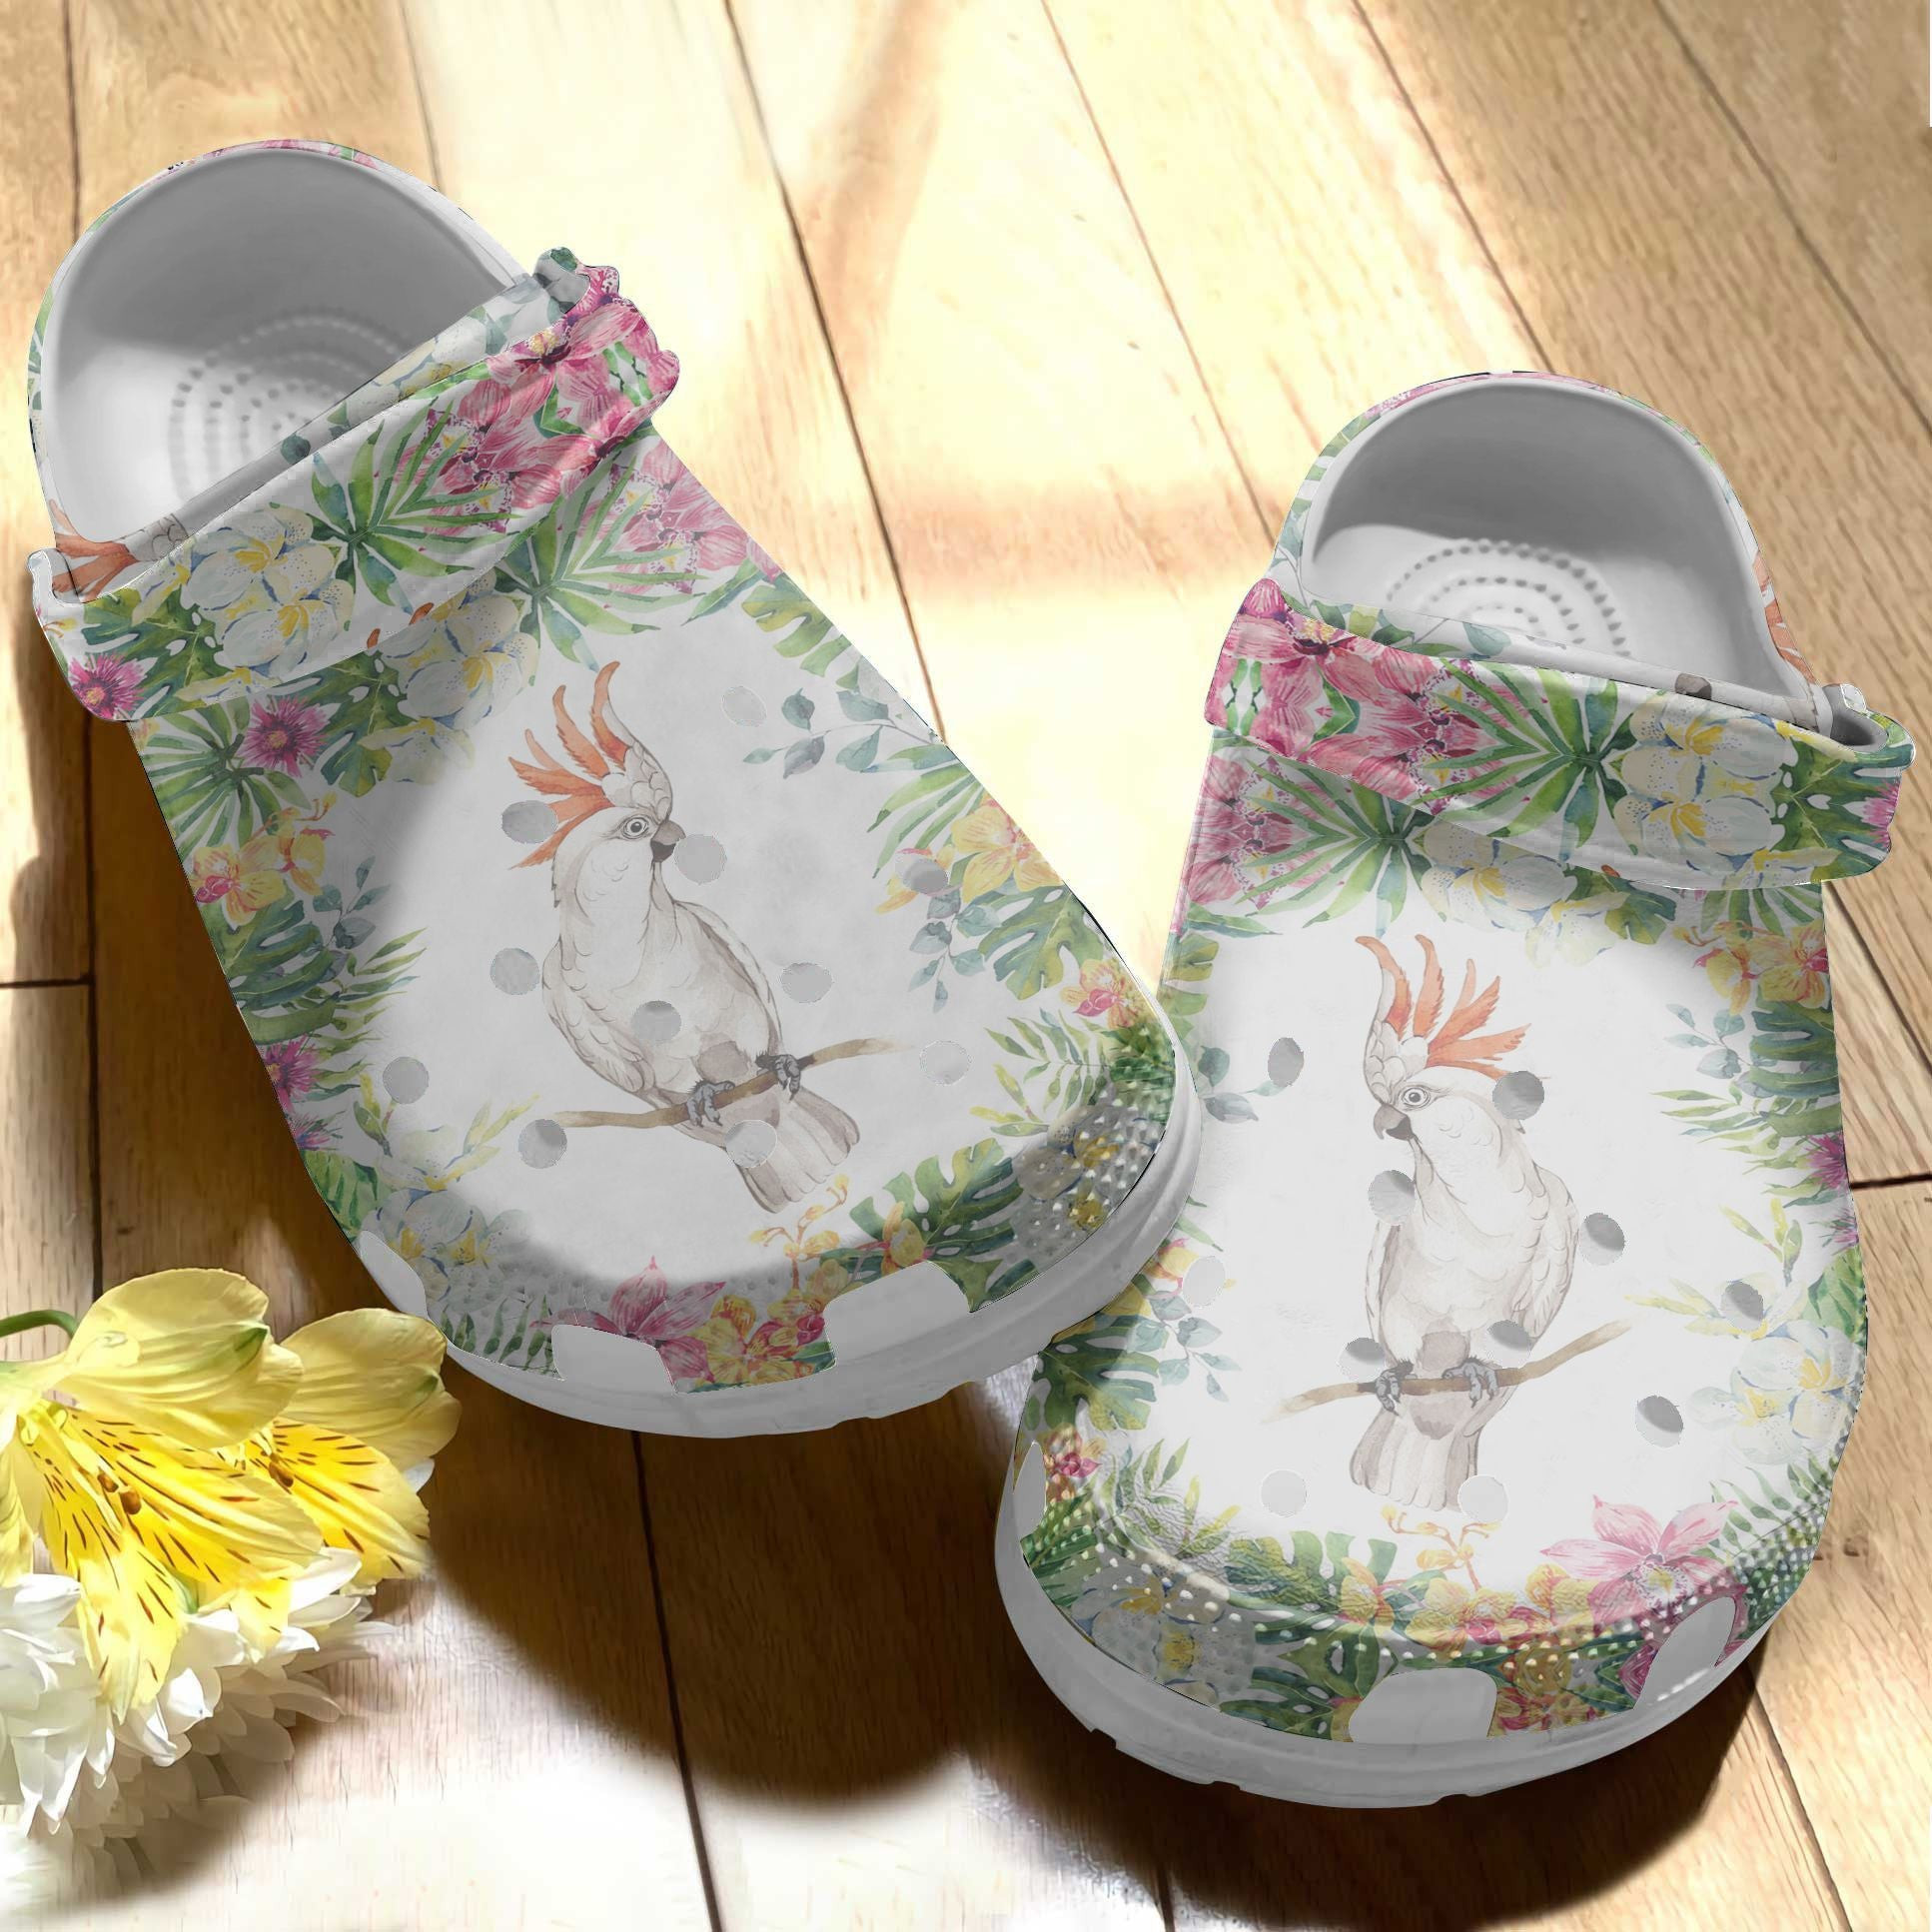 Birds Flower White Parrot Flower Crocs Shoes - Cockatoo Crocs Shoes Crocbland Clog Birthday Gifts For Woman Daughter Mother